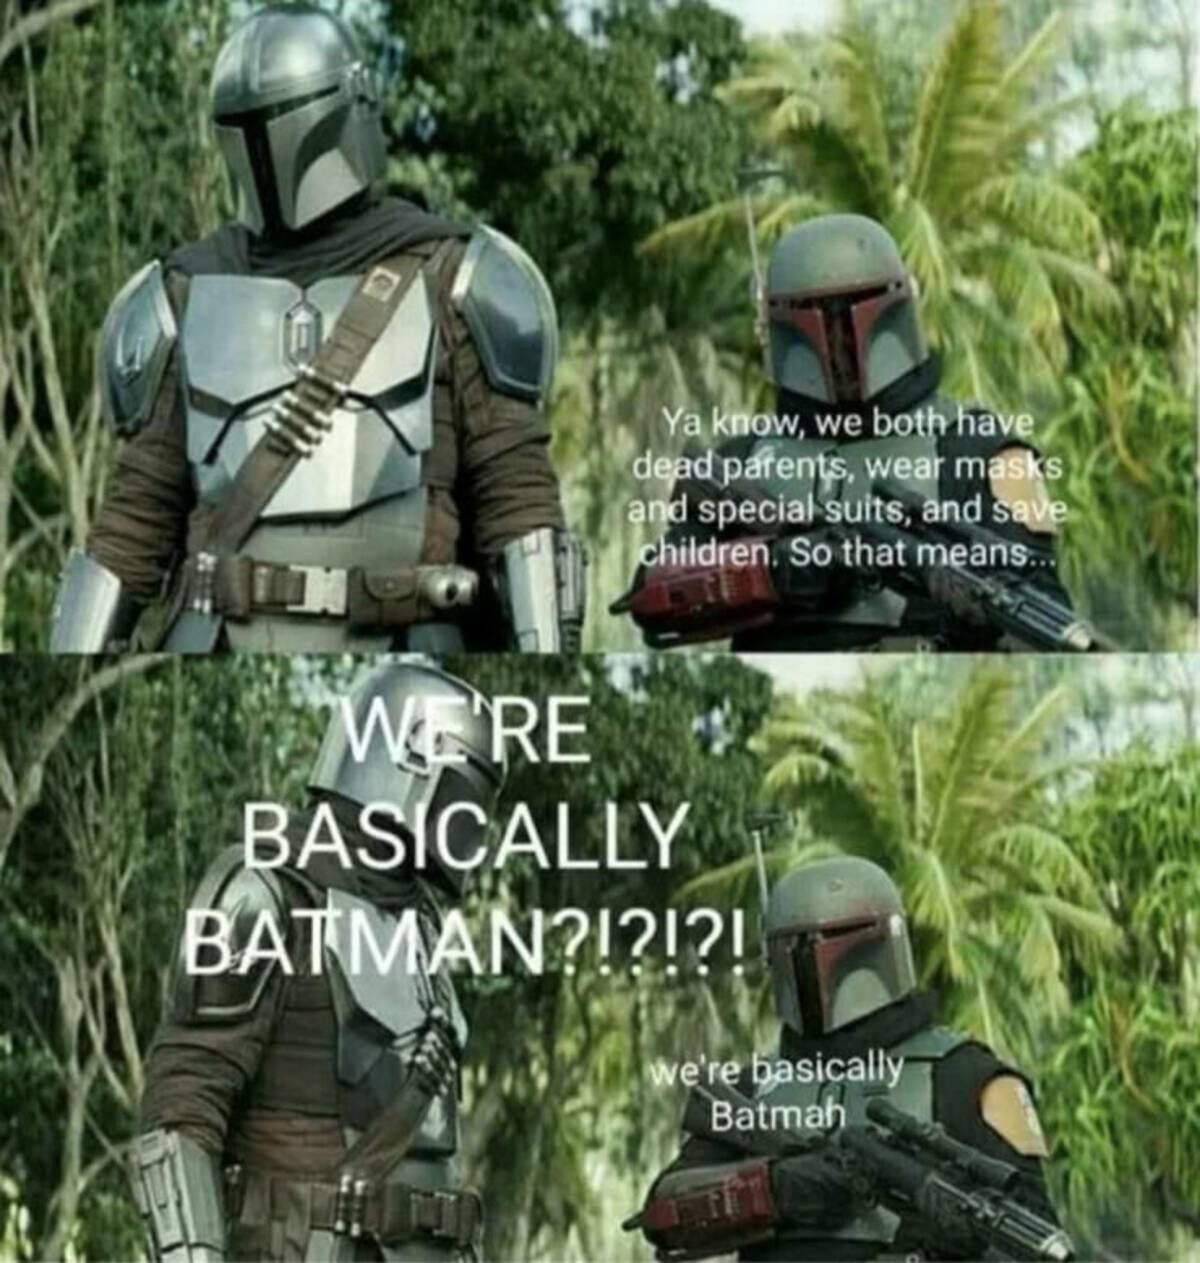 boba fett mandalorian scene - Ya know, we both have dead parents, wear masks and special suits, and save children. So that means.. We'Re Basically Batman?12121 we're basically Batmah